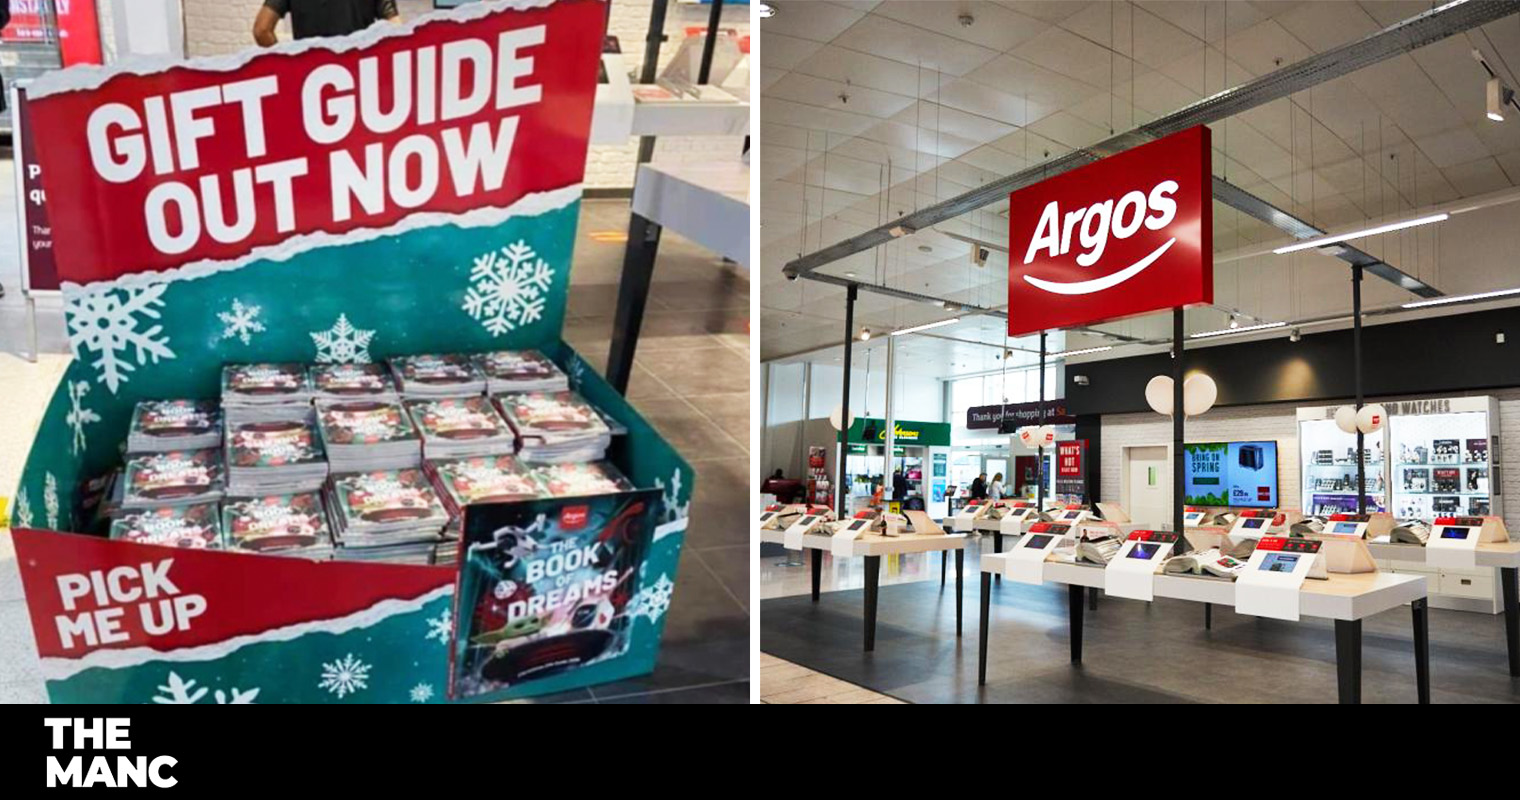 Argos brings out special Christmas gift catalogue after recently